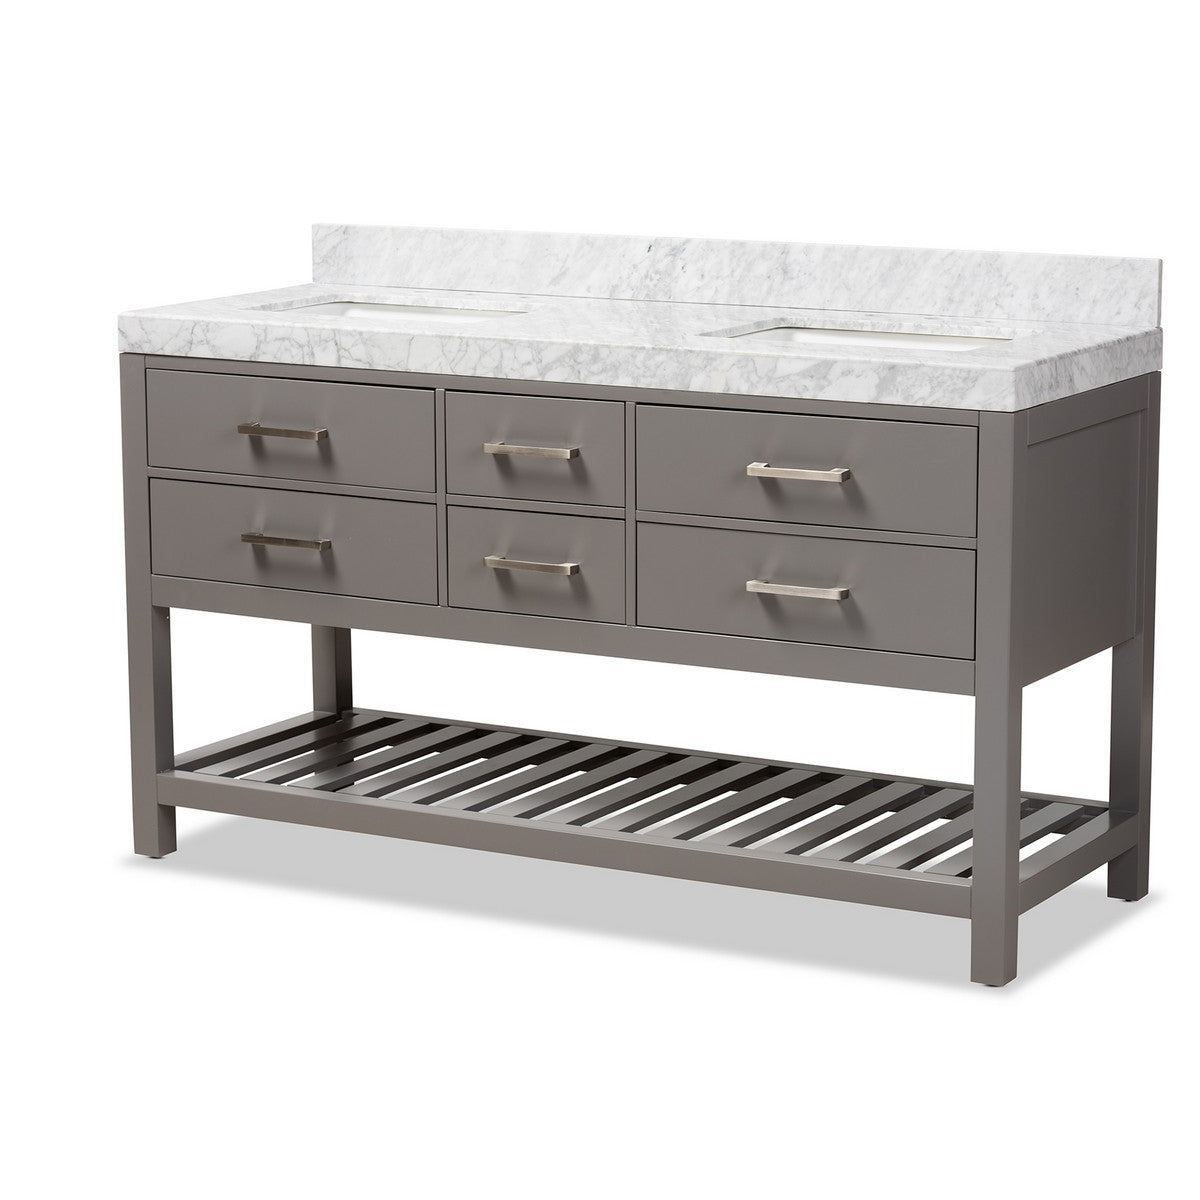 Baxton Studio Yolanda 60-Inch Modern and Contemporary Grey Finished Wood and Marble Double Sink Bathroom Vanity Baxton Studio-Bathroom Vanities-Minimal And Modern - 1